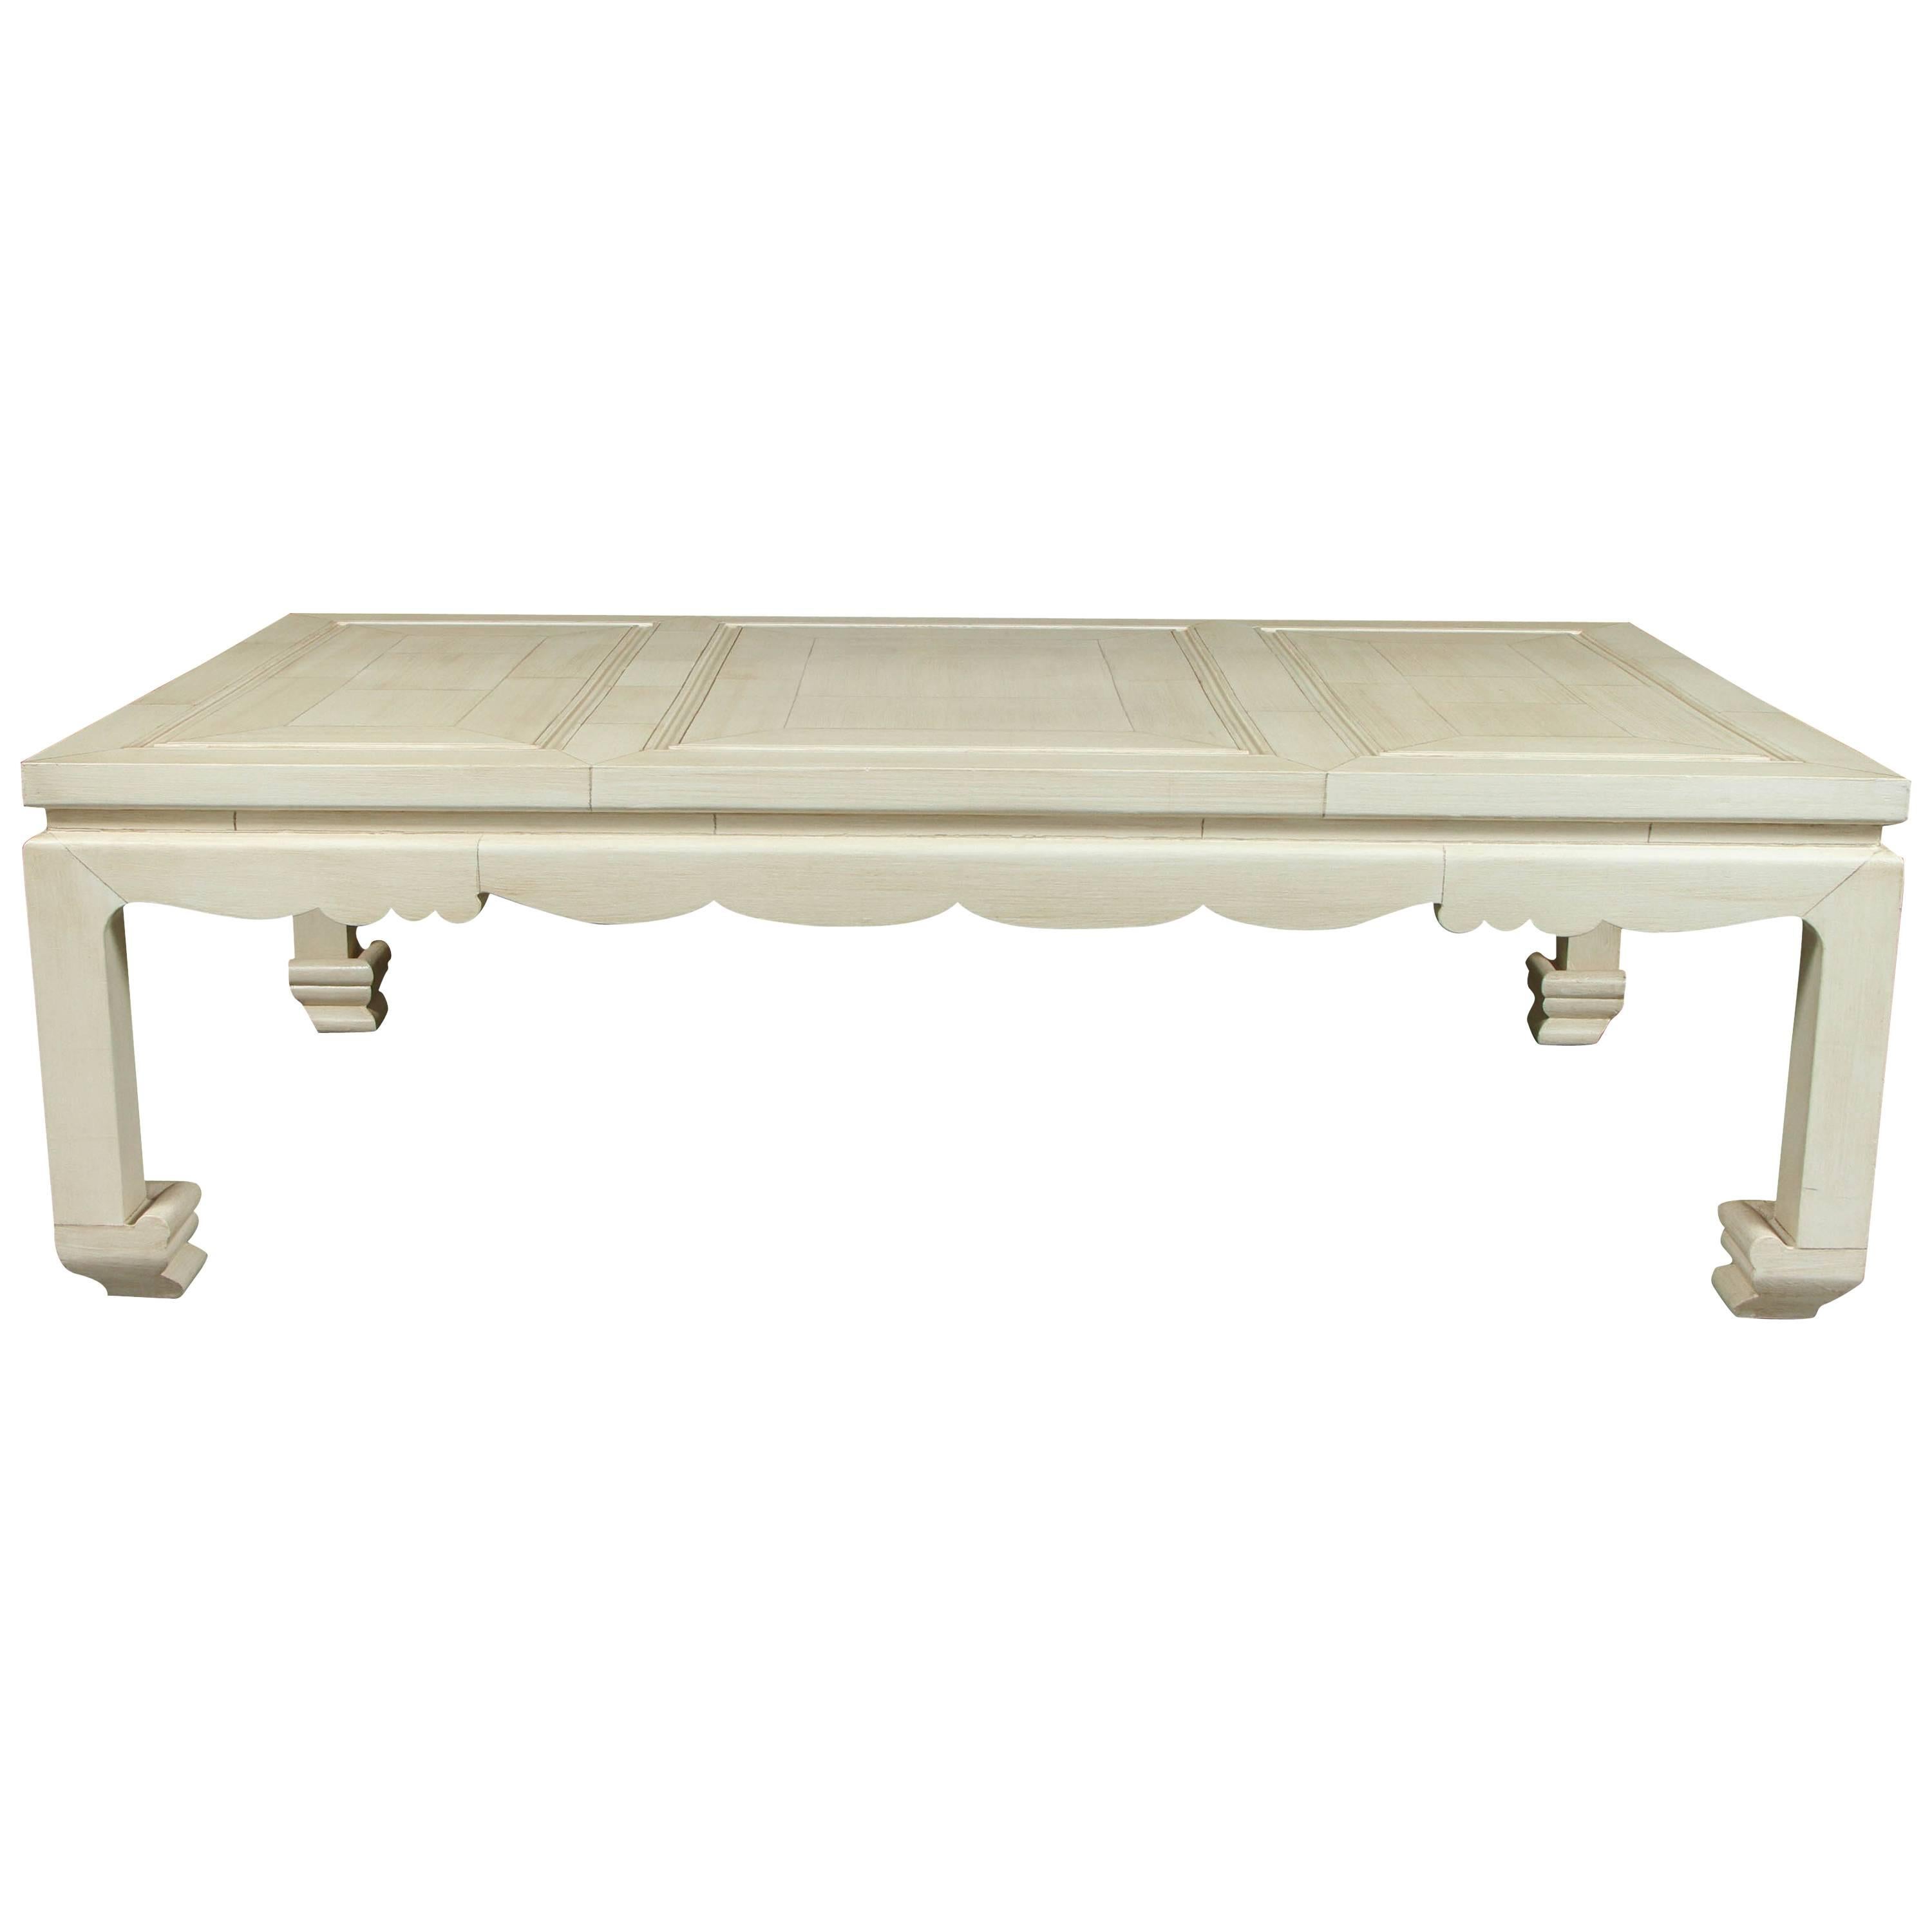 A Vintage Ming-Style Coffee Table with a Faux Ivory Inlay Finish